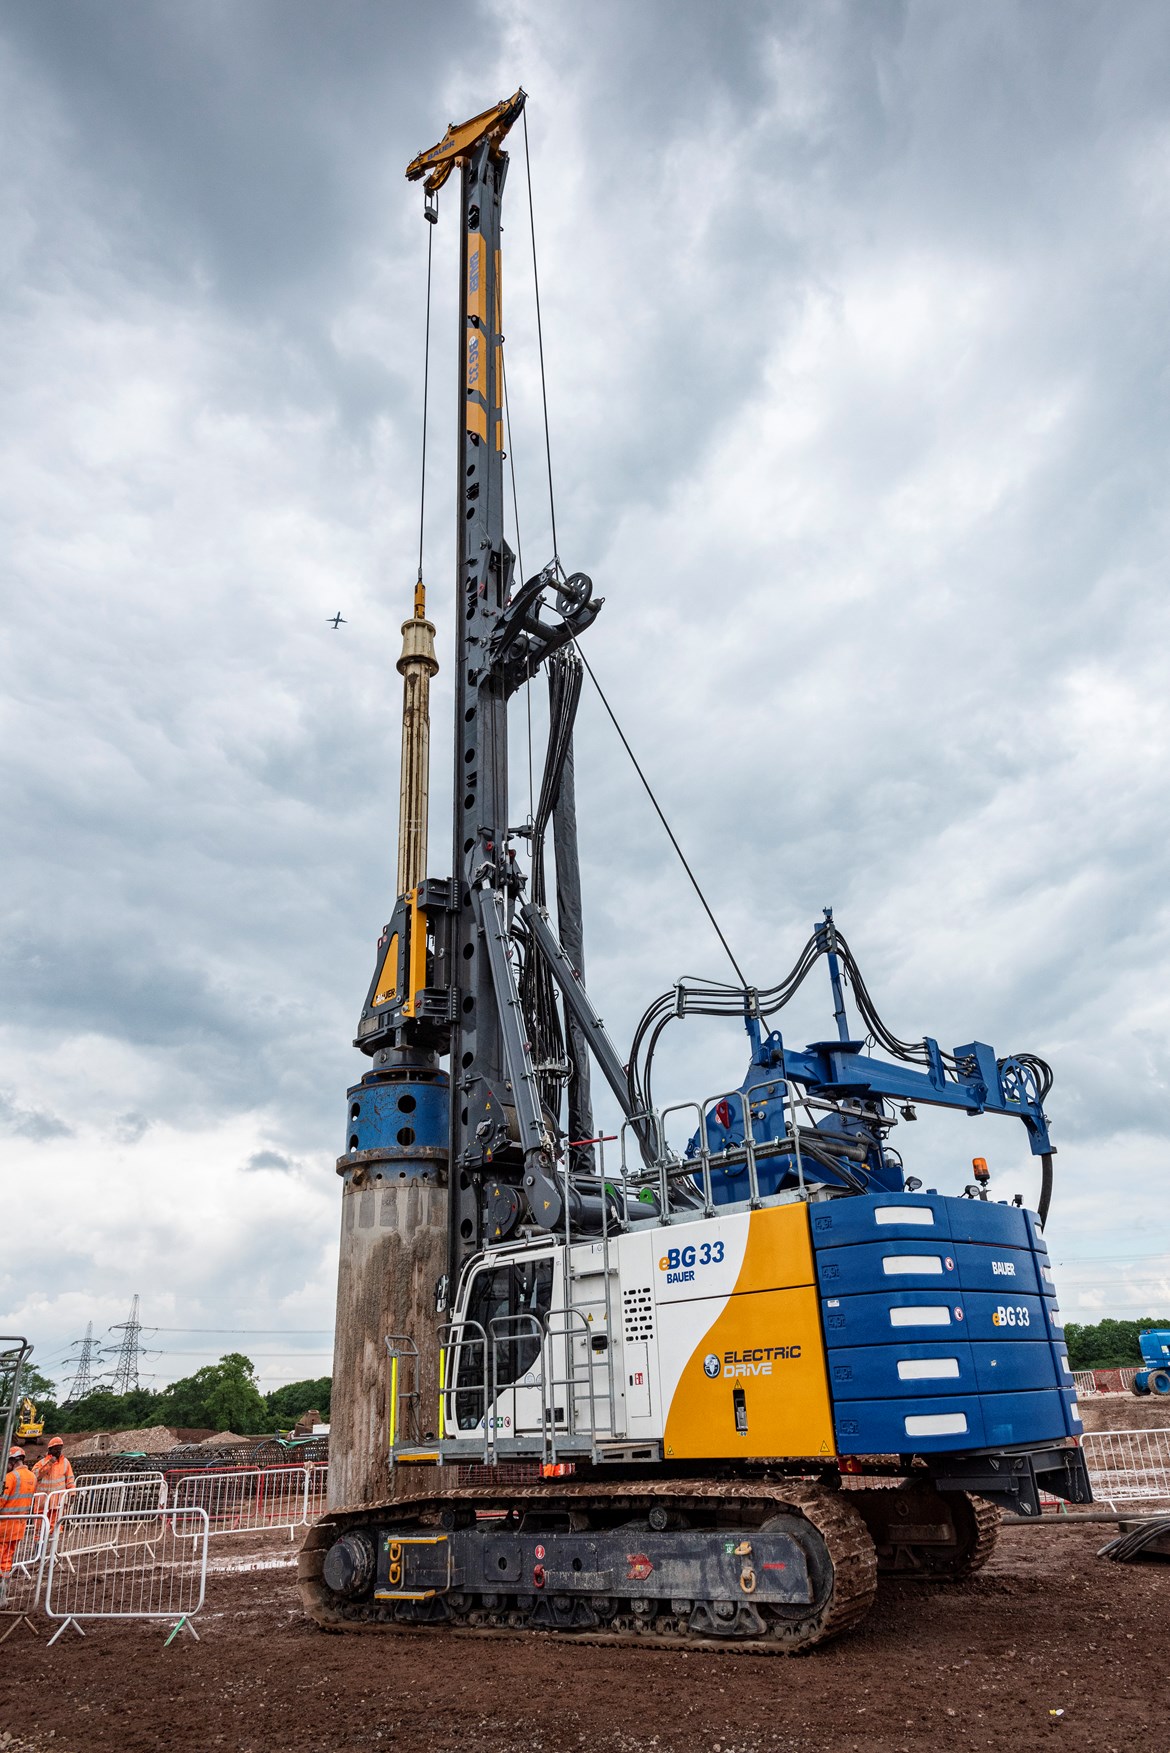 HS2 trials ‘first of a kind’ electric drilling rig in bid to cut carbon in construction: The new BAUER eBG33 piling rig cuts 1,200kg of CO2 per day and reduces noise by 50% 